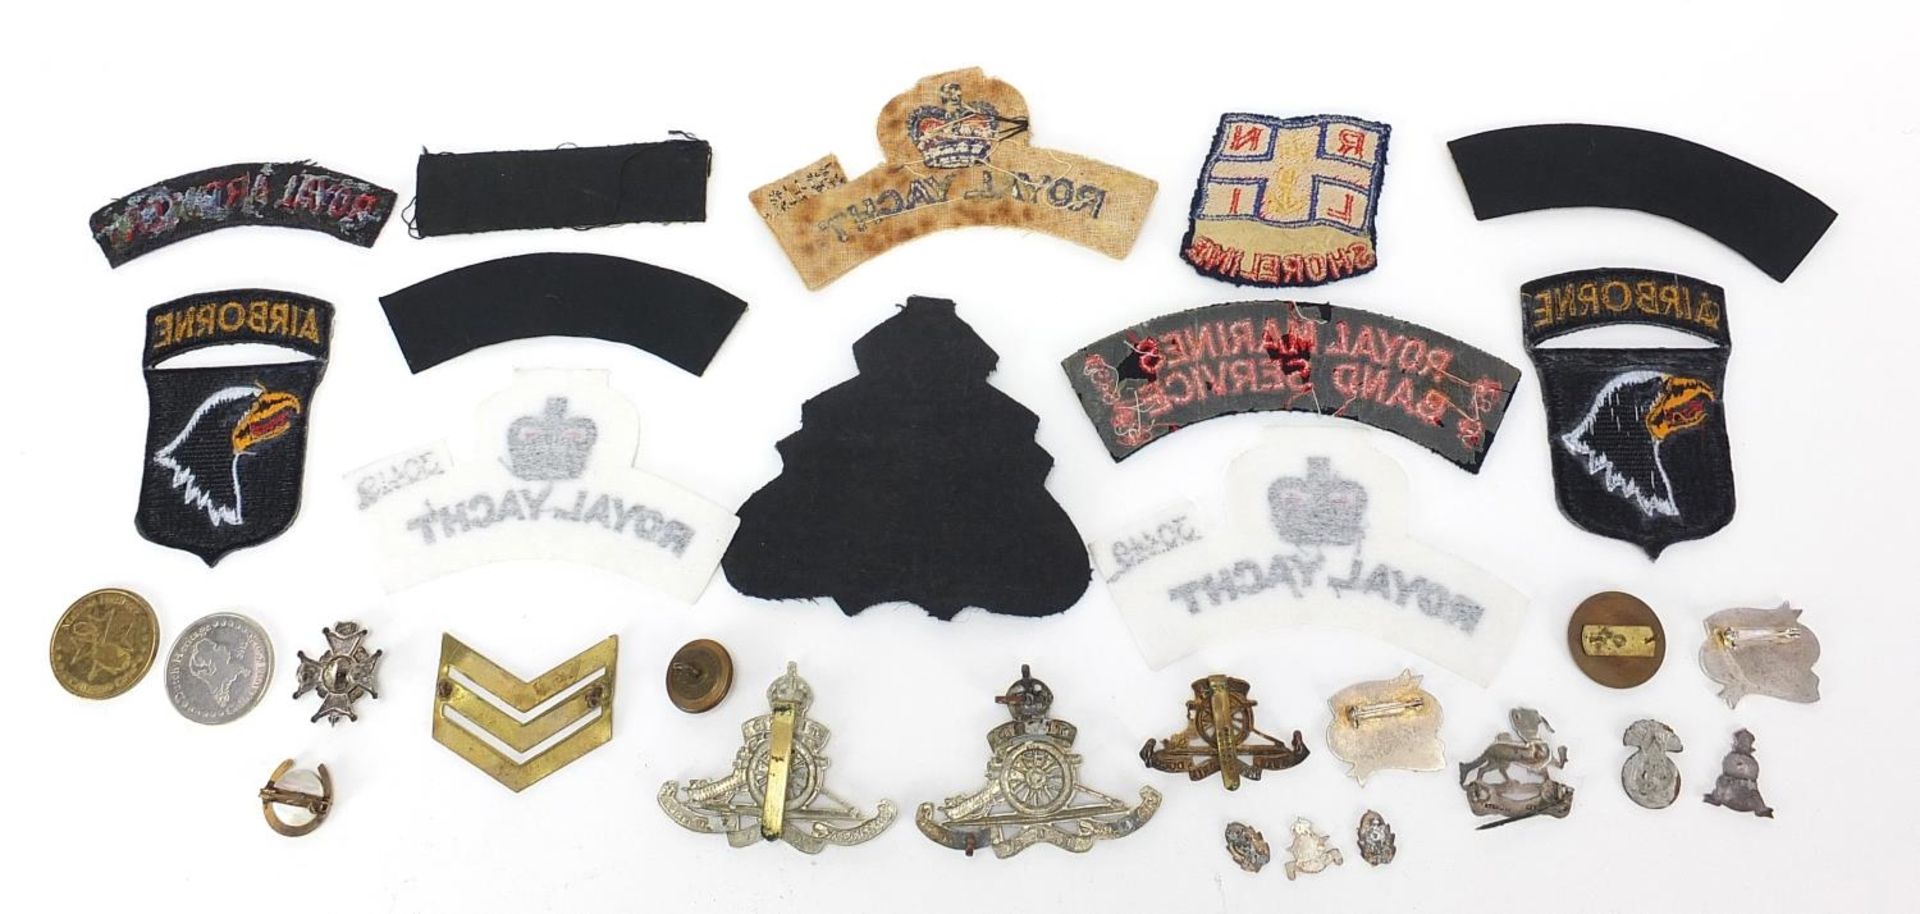 British military interest cloth patches and badges, some silver and enamel including Royal Artillery - Image 4 of 6